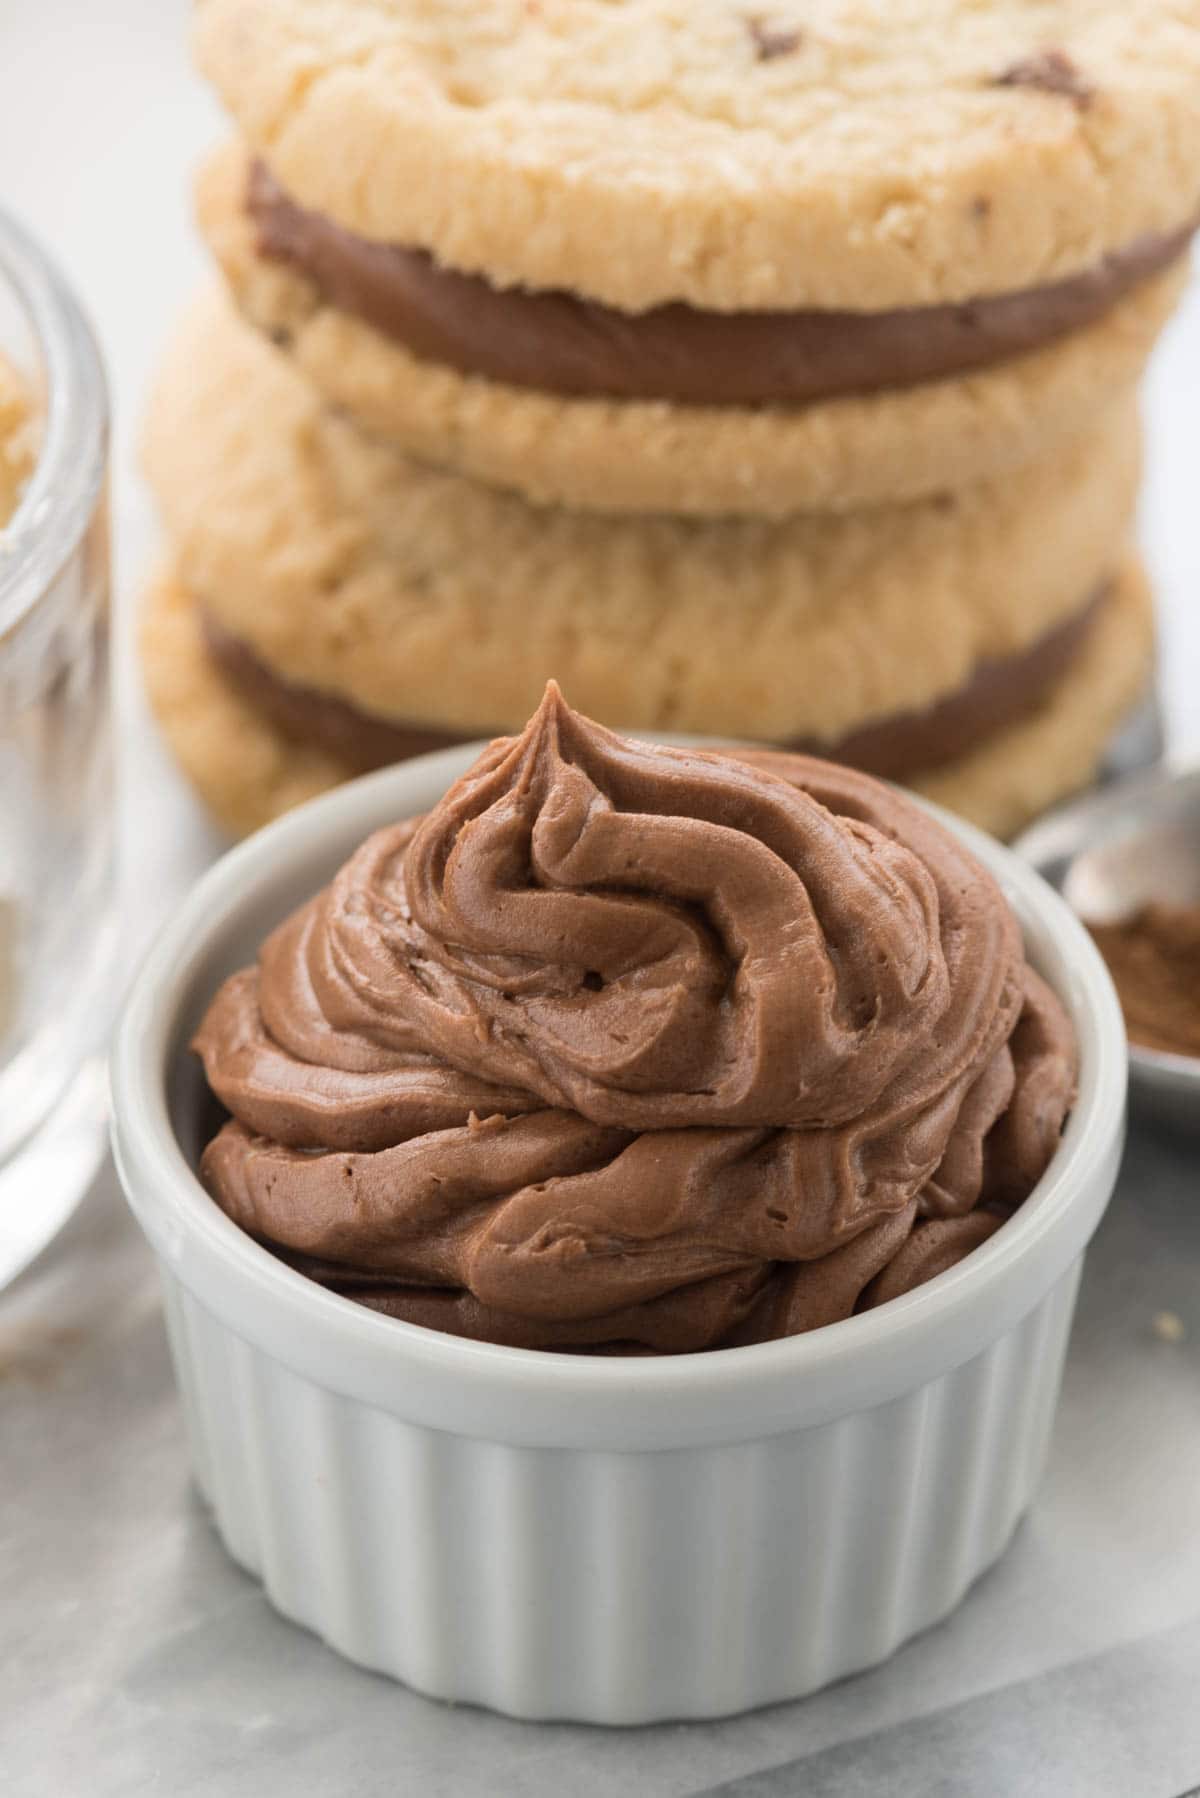 Easy Chocolate Mocha Frosting - rich chocolate frosting filled with espresso!